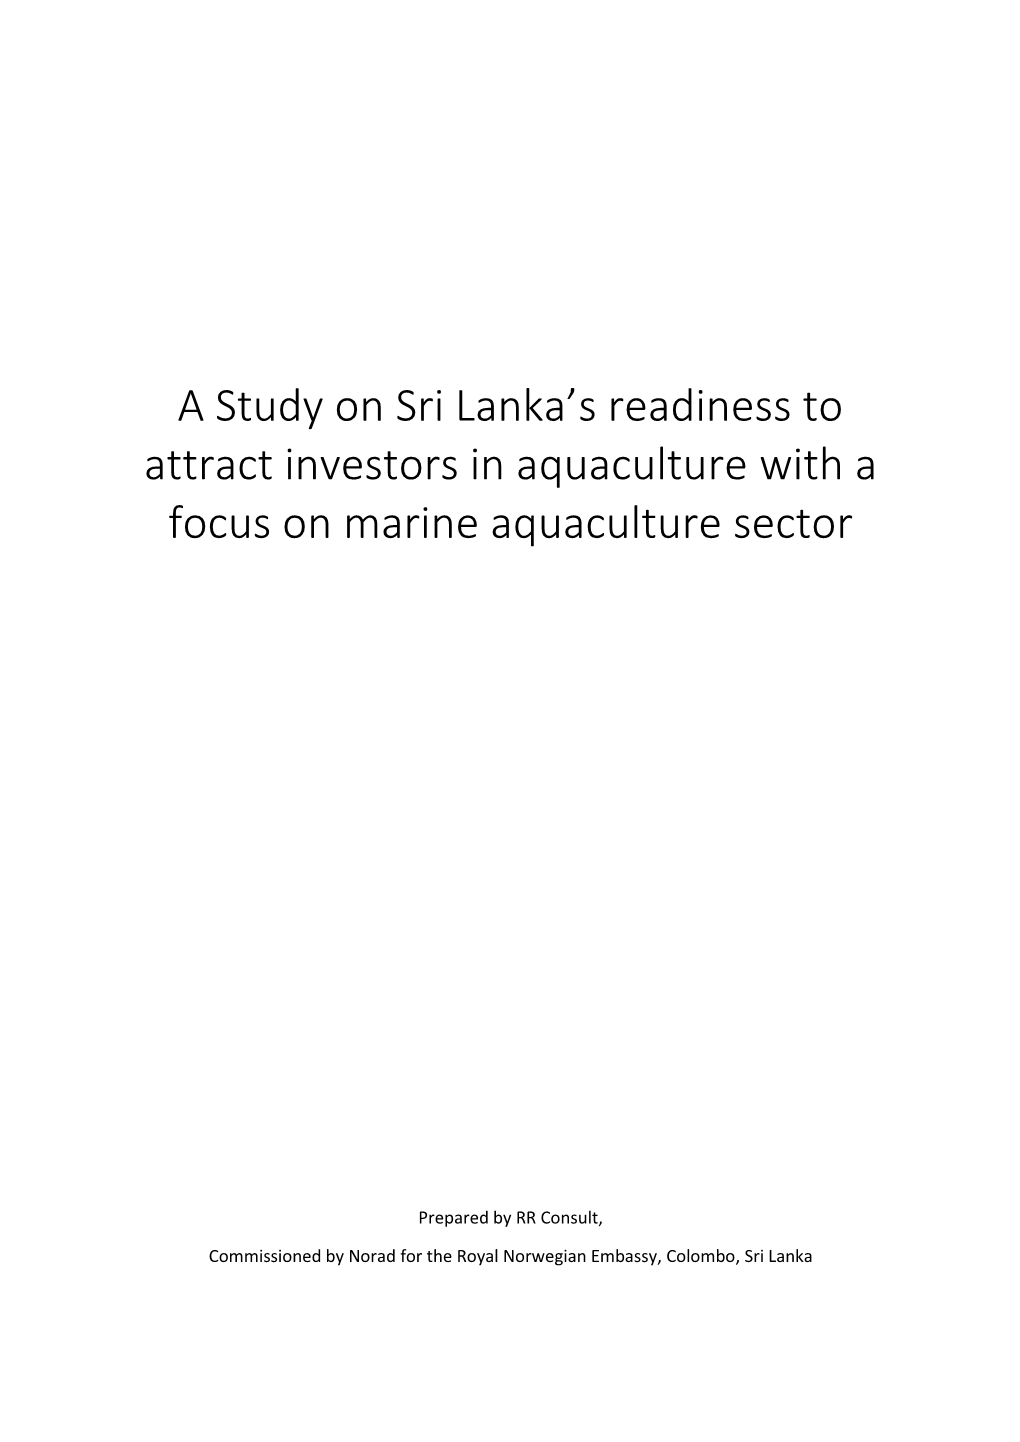 A Study on Sri Lanka's Readiness to Attract Investors in Aquaculture With